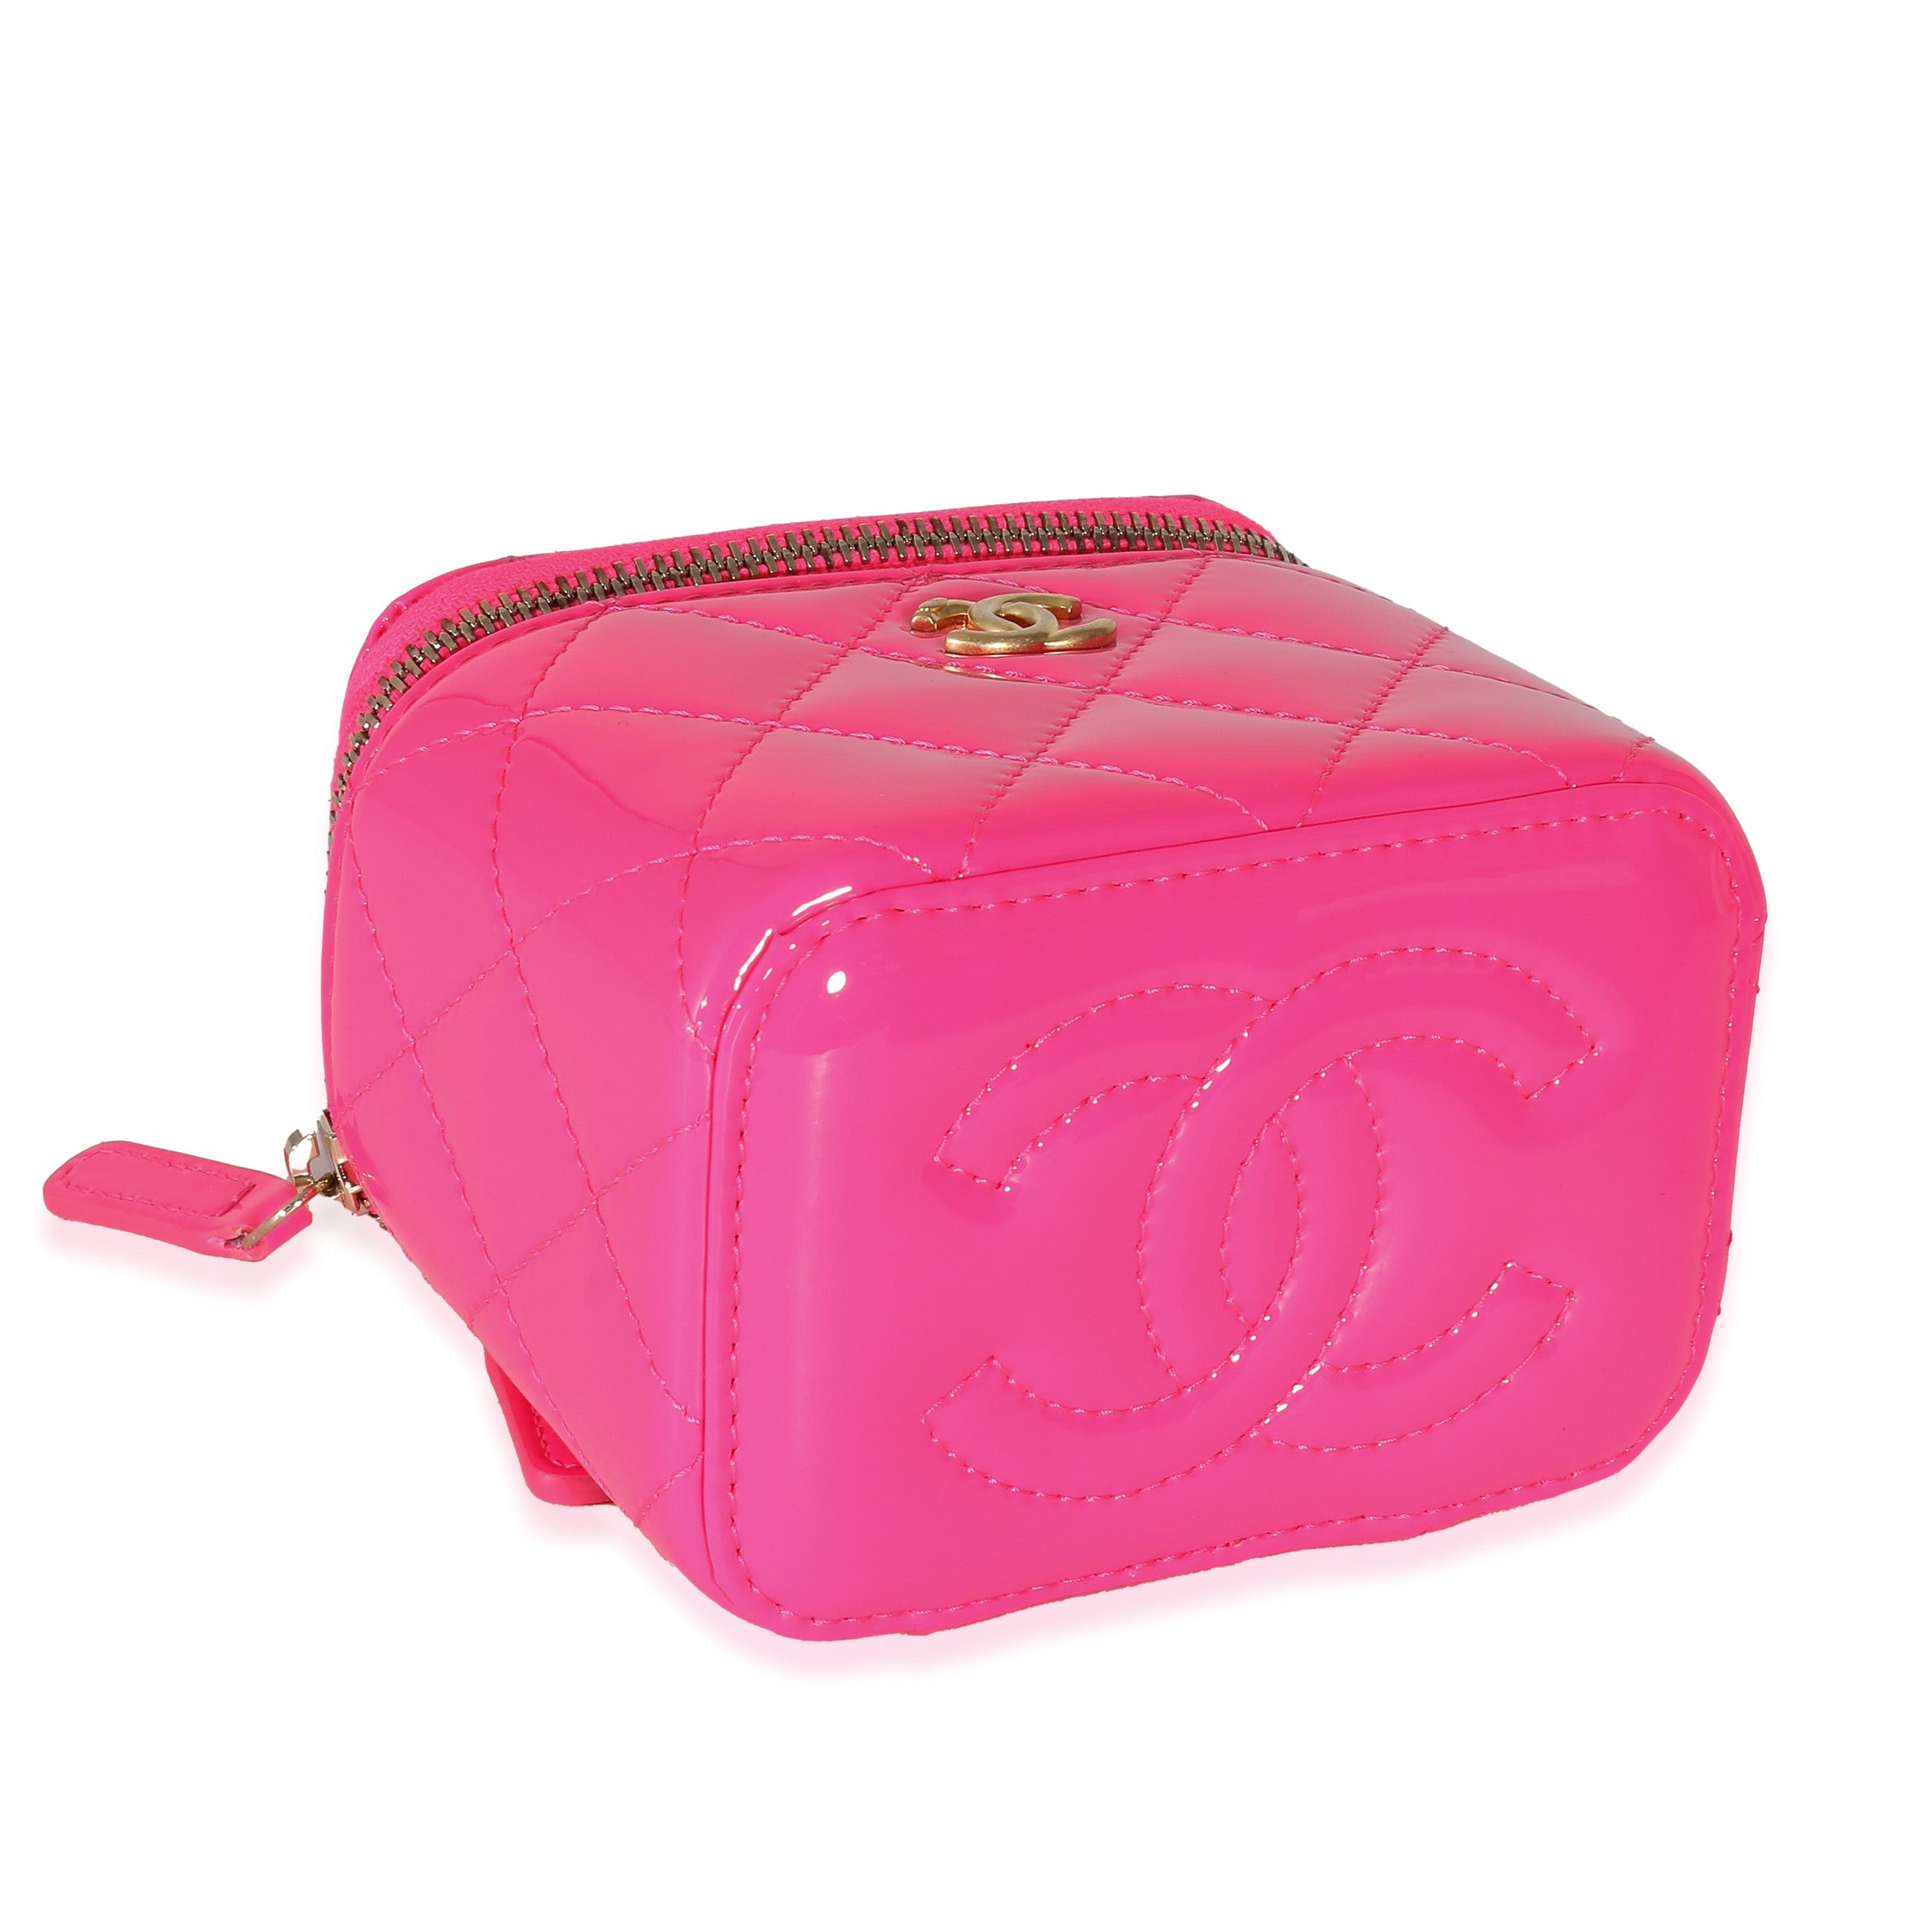 Chanel Chanel Neon Pink Quilted Patent Pearl Crush Mini Vanity Case